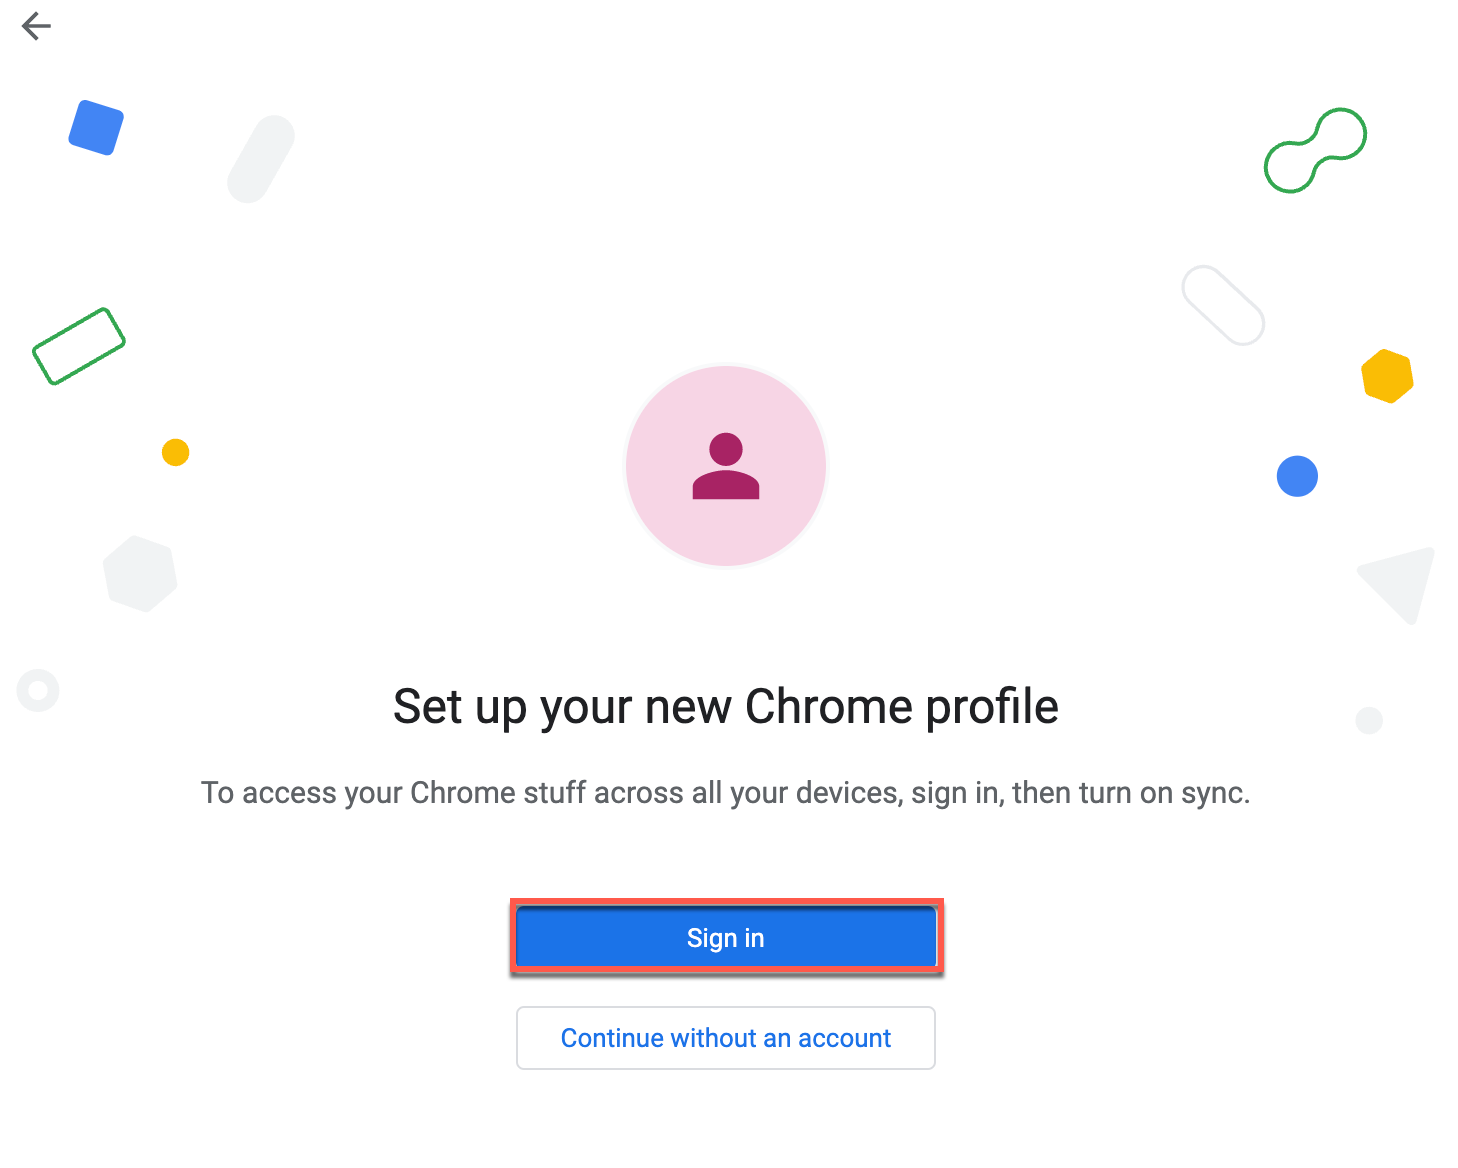 sign-in-chrome-profile.png